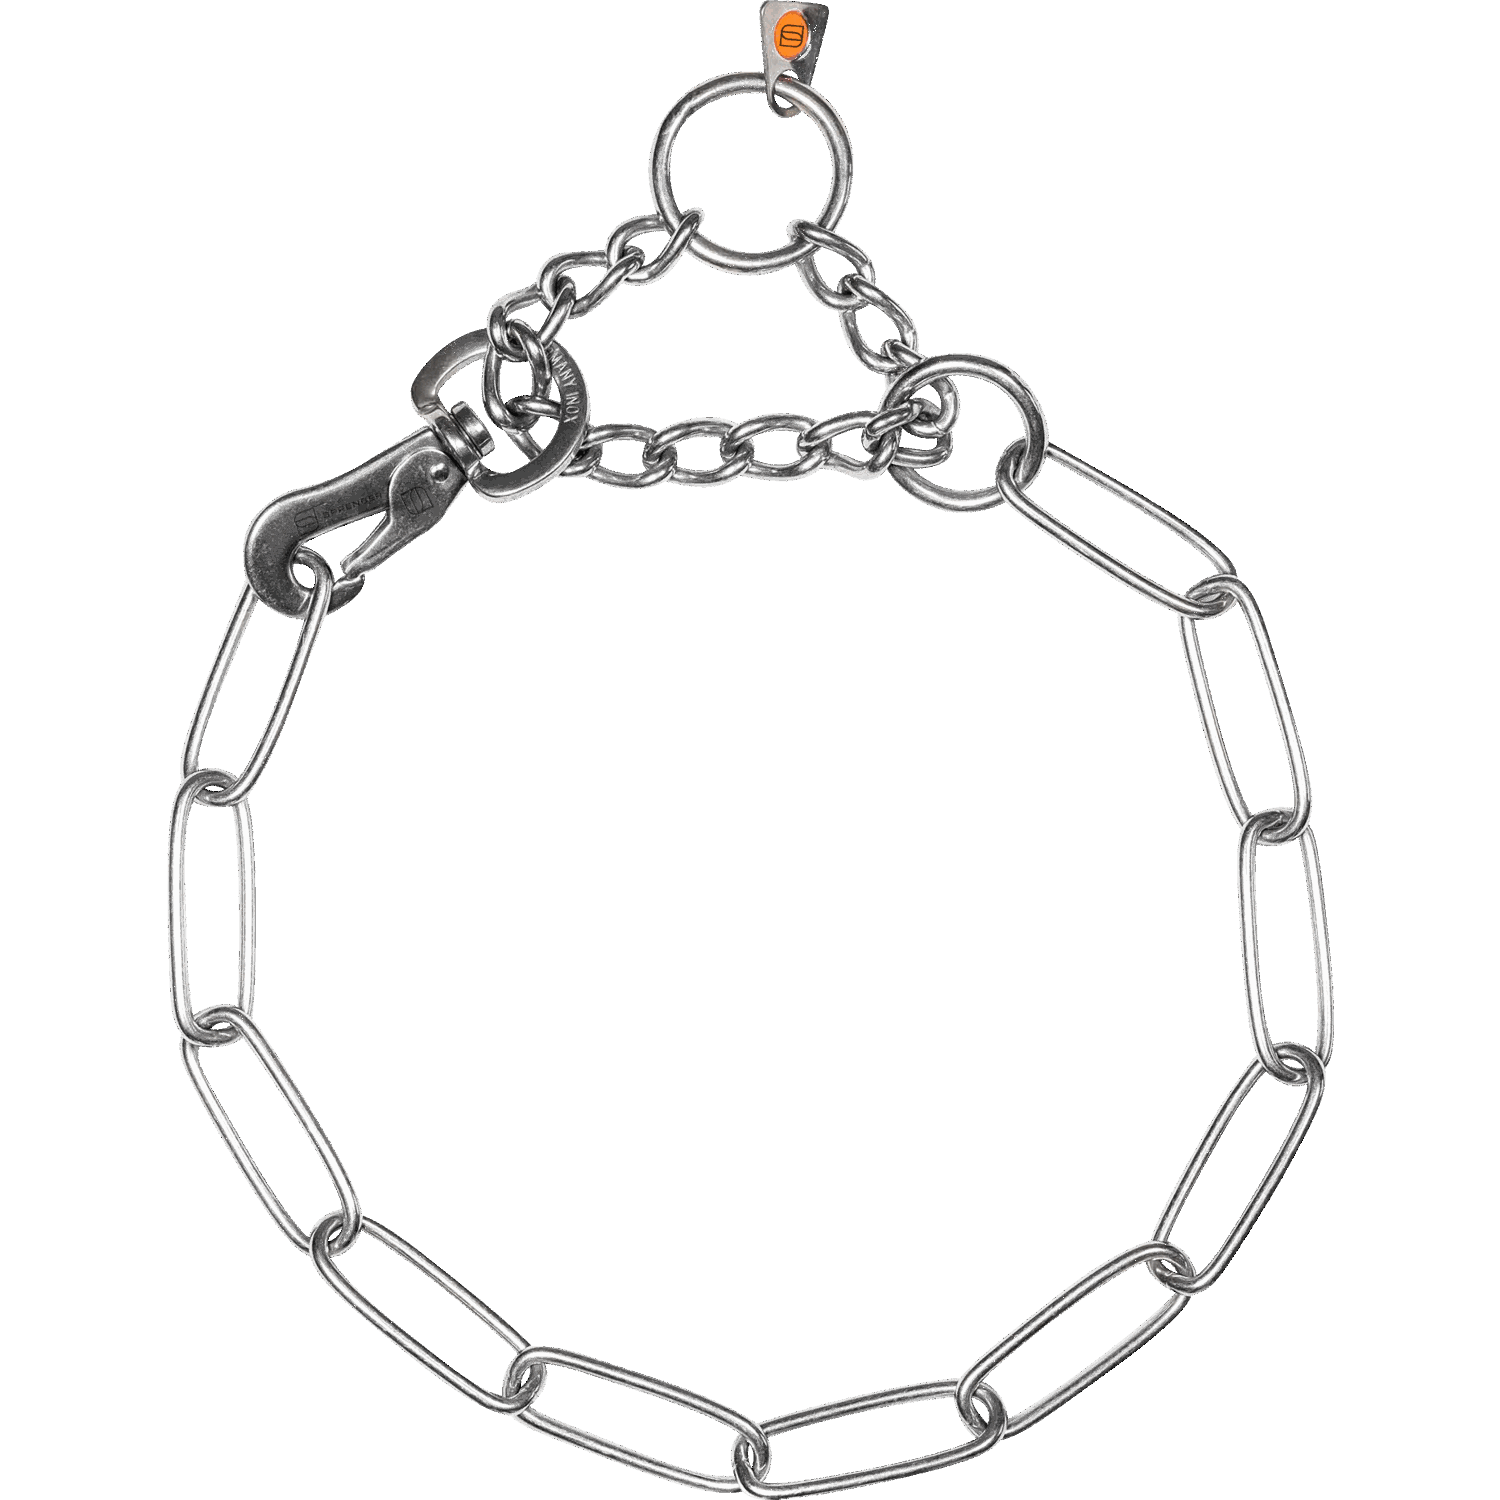 Adjustable Long Chain Link Collar (Stainless Steel Only) - 3mm